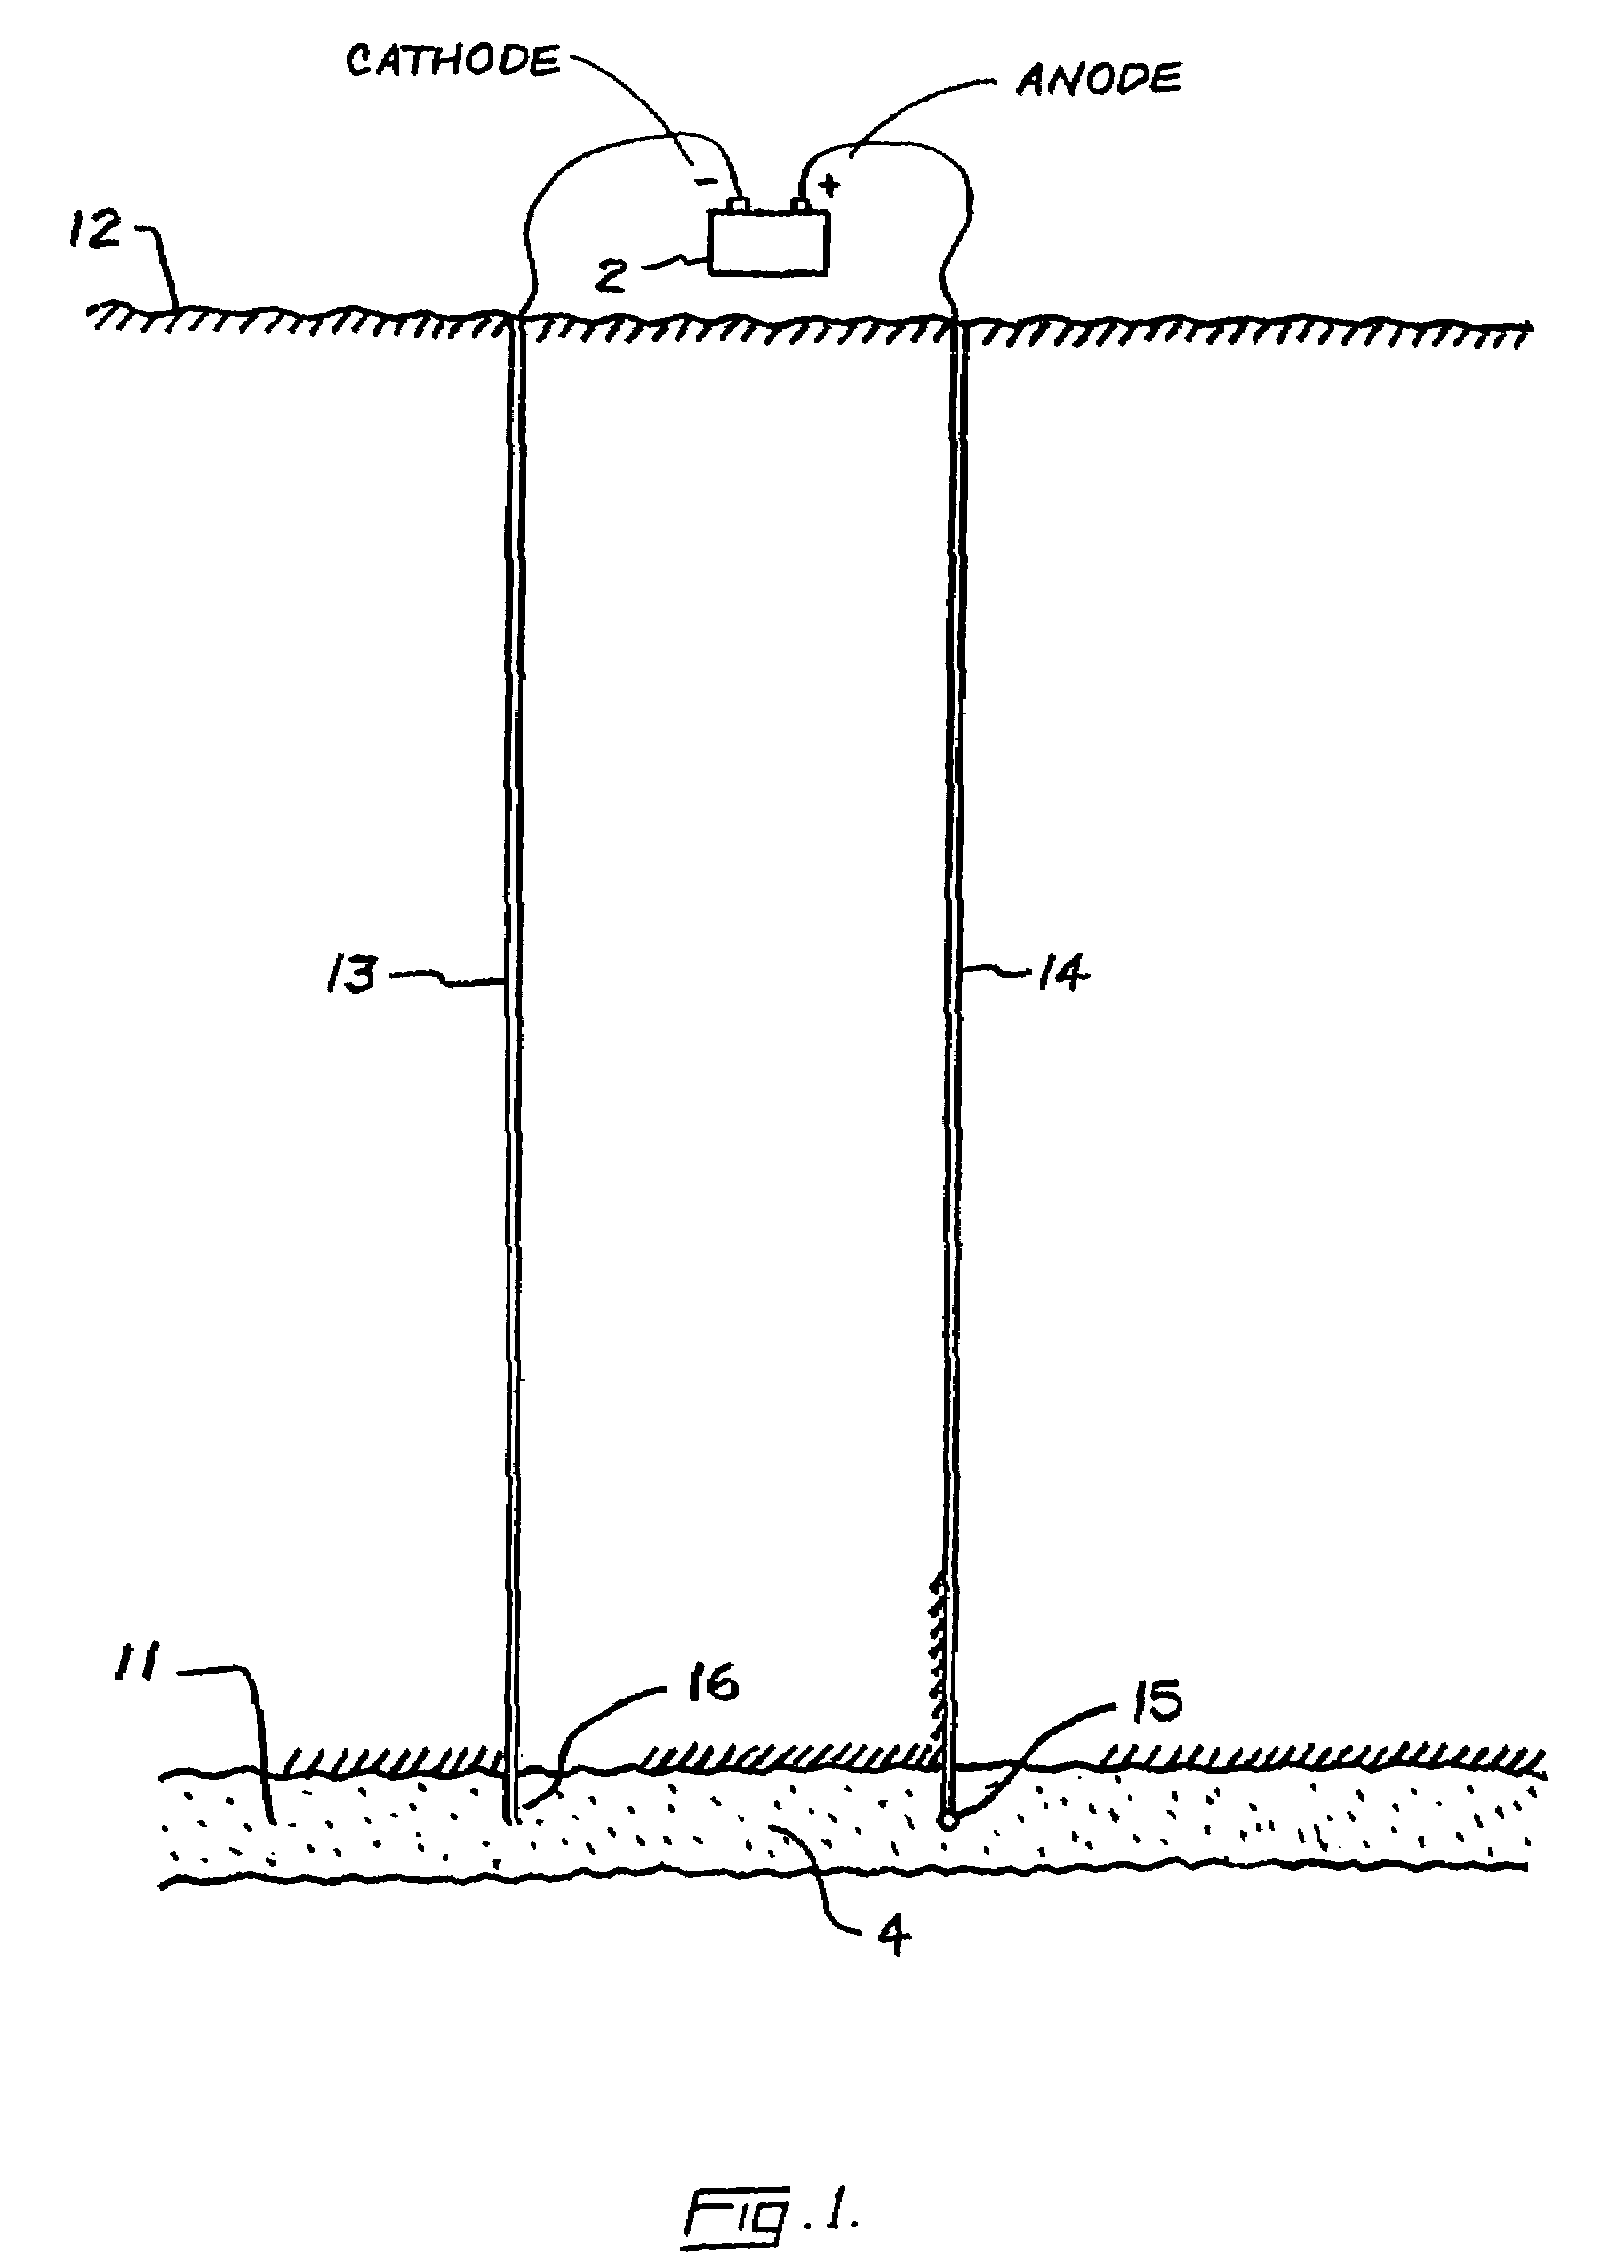 Method for enhancing oil production using electricity